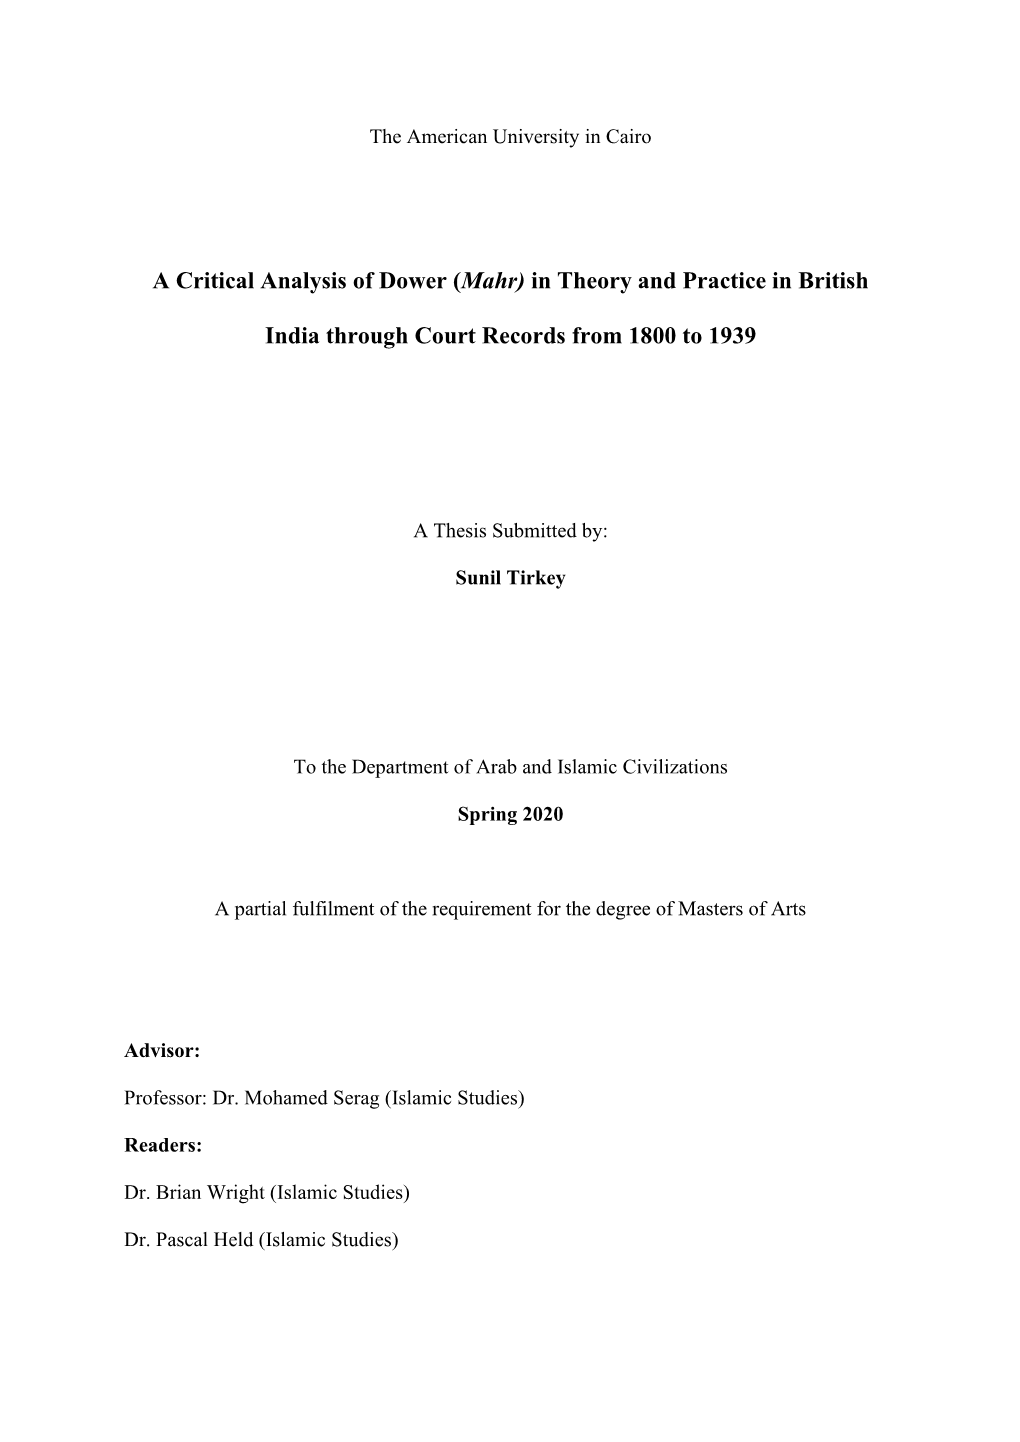 A Critical Analysis of Dower (Mahr) in Theory and Practice in British India Through Court Records from 1800 to 1939